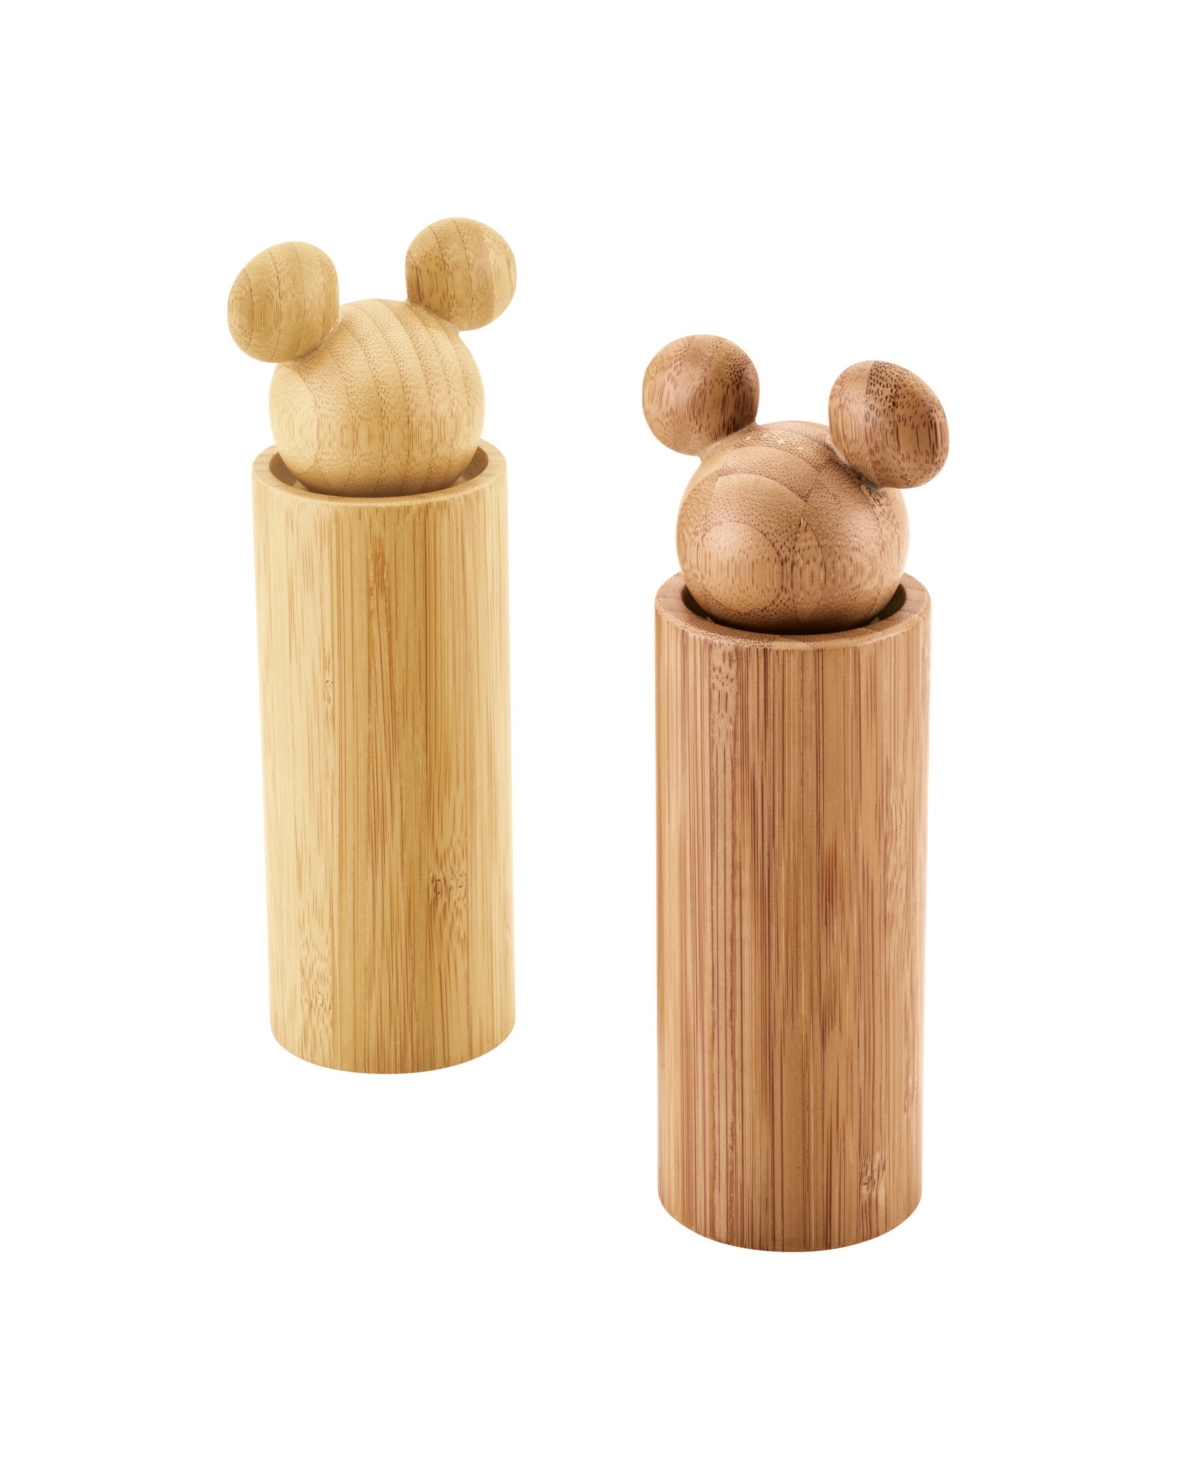 Shop Disney Monochrome Bamboo Salt And Pepper Grinders In Brown